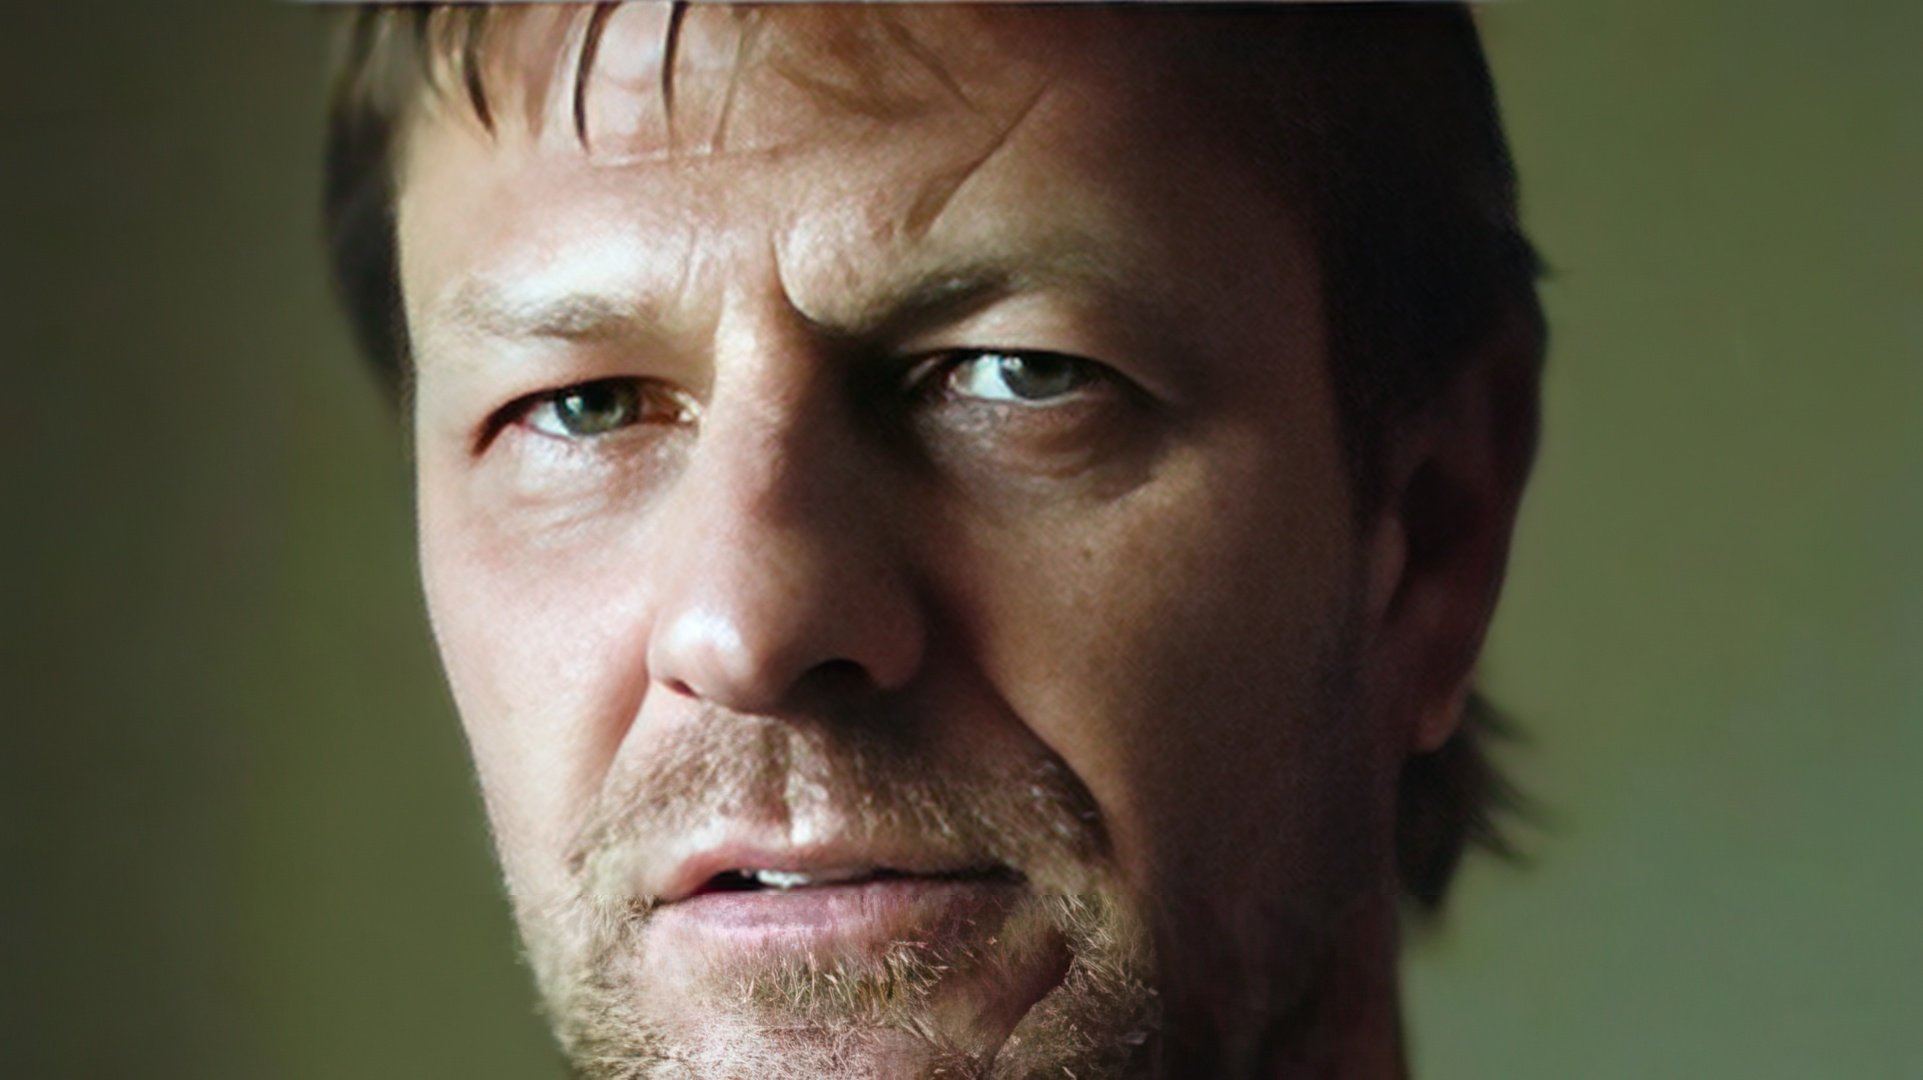 A scar is visible above the actor's left eye